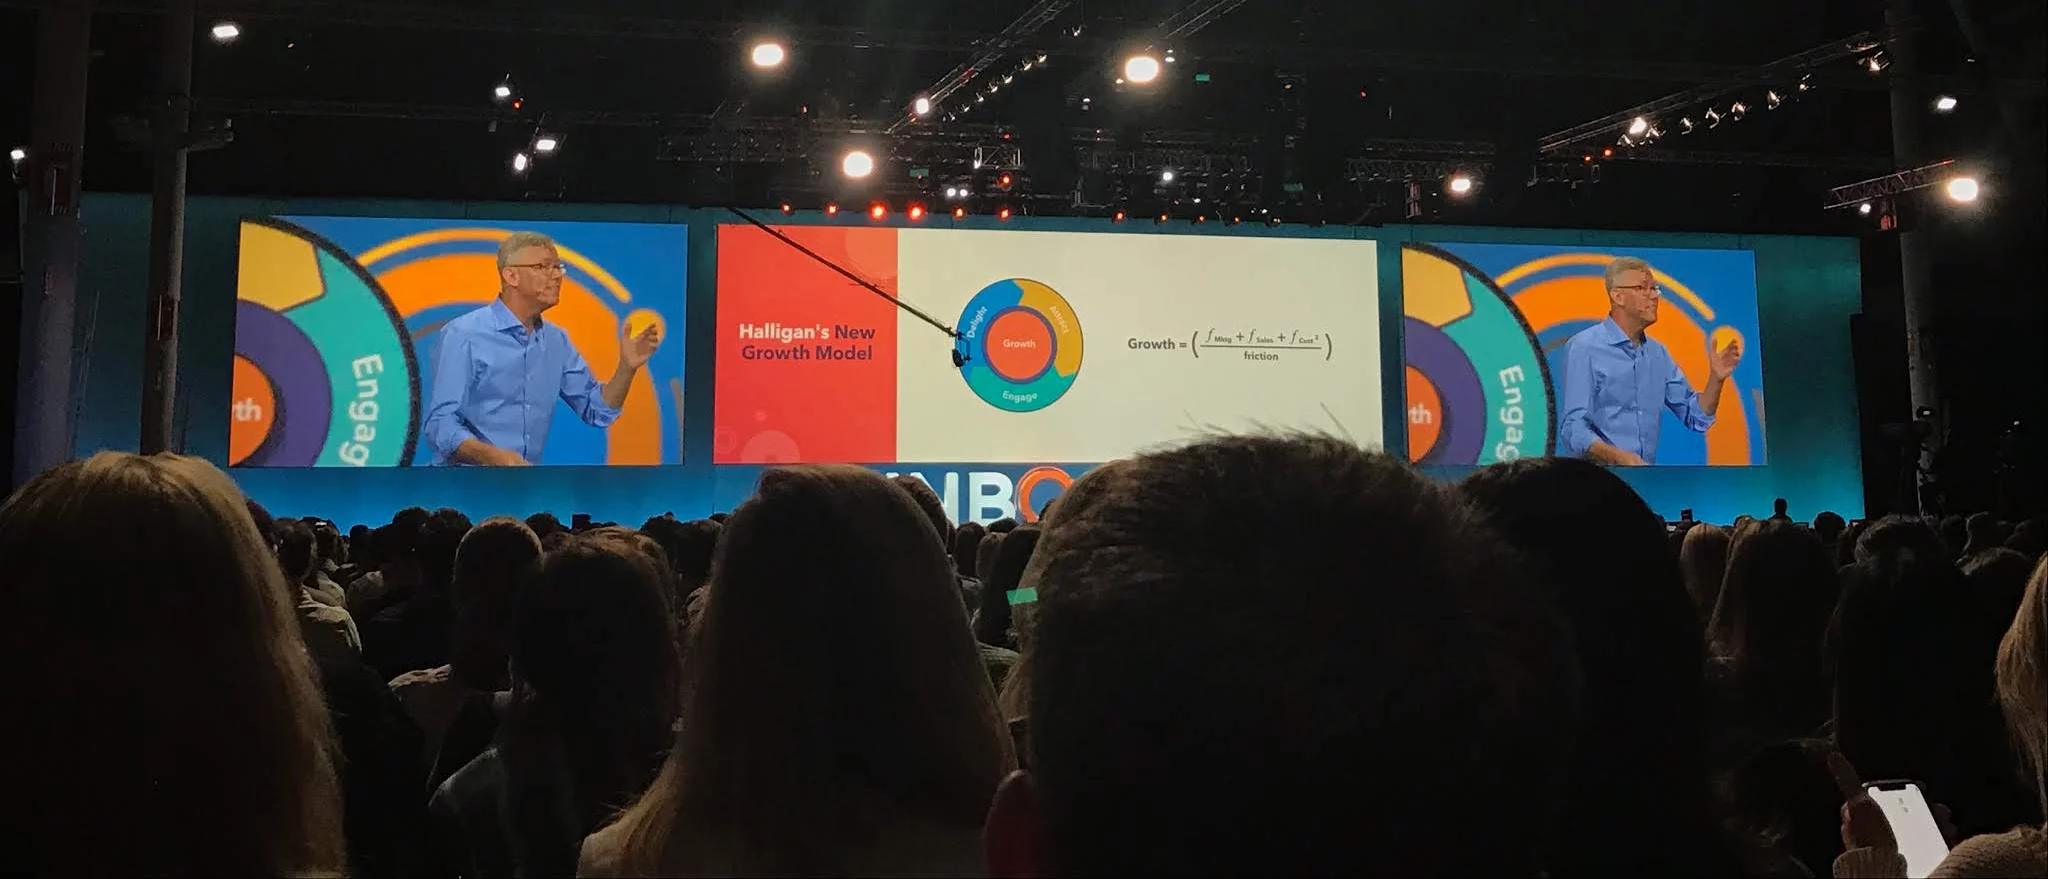 Our Top Takeaways from INBOUND 2018